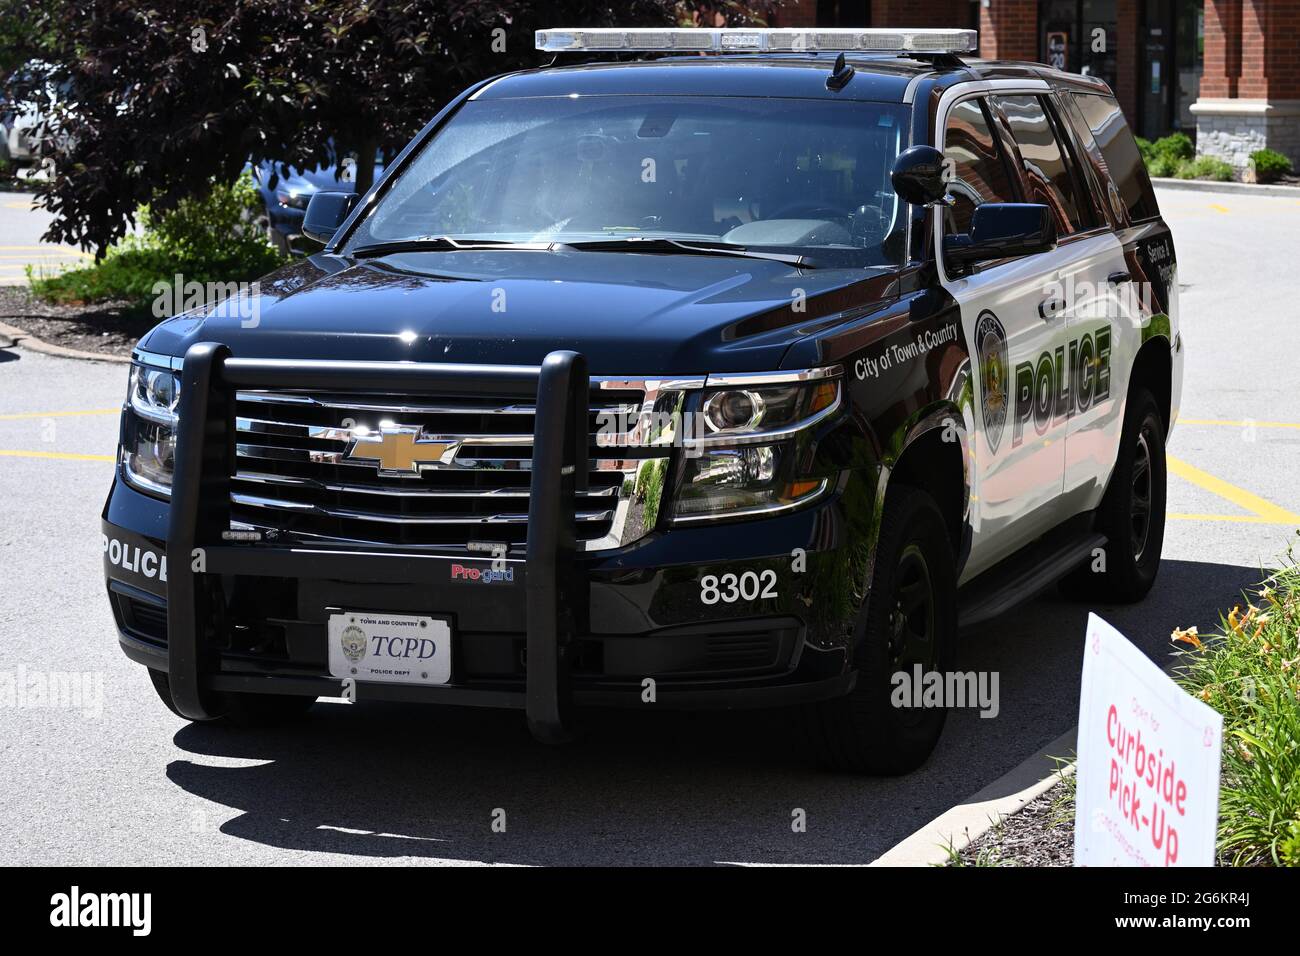 Town and Country Police Department Chevrolet Tahoe PPV with ram bar, unit 8302. Town and Country, Missouri, United States. Stock Photo